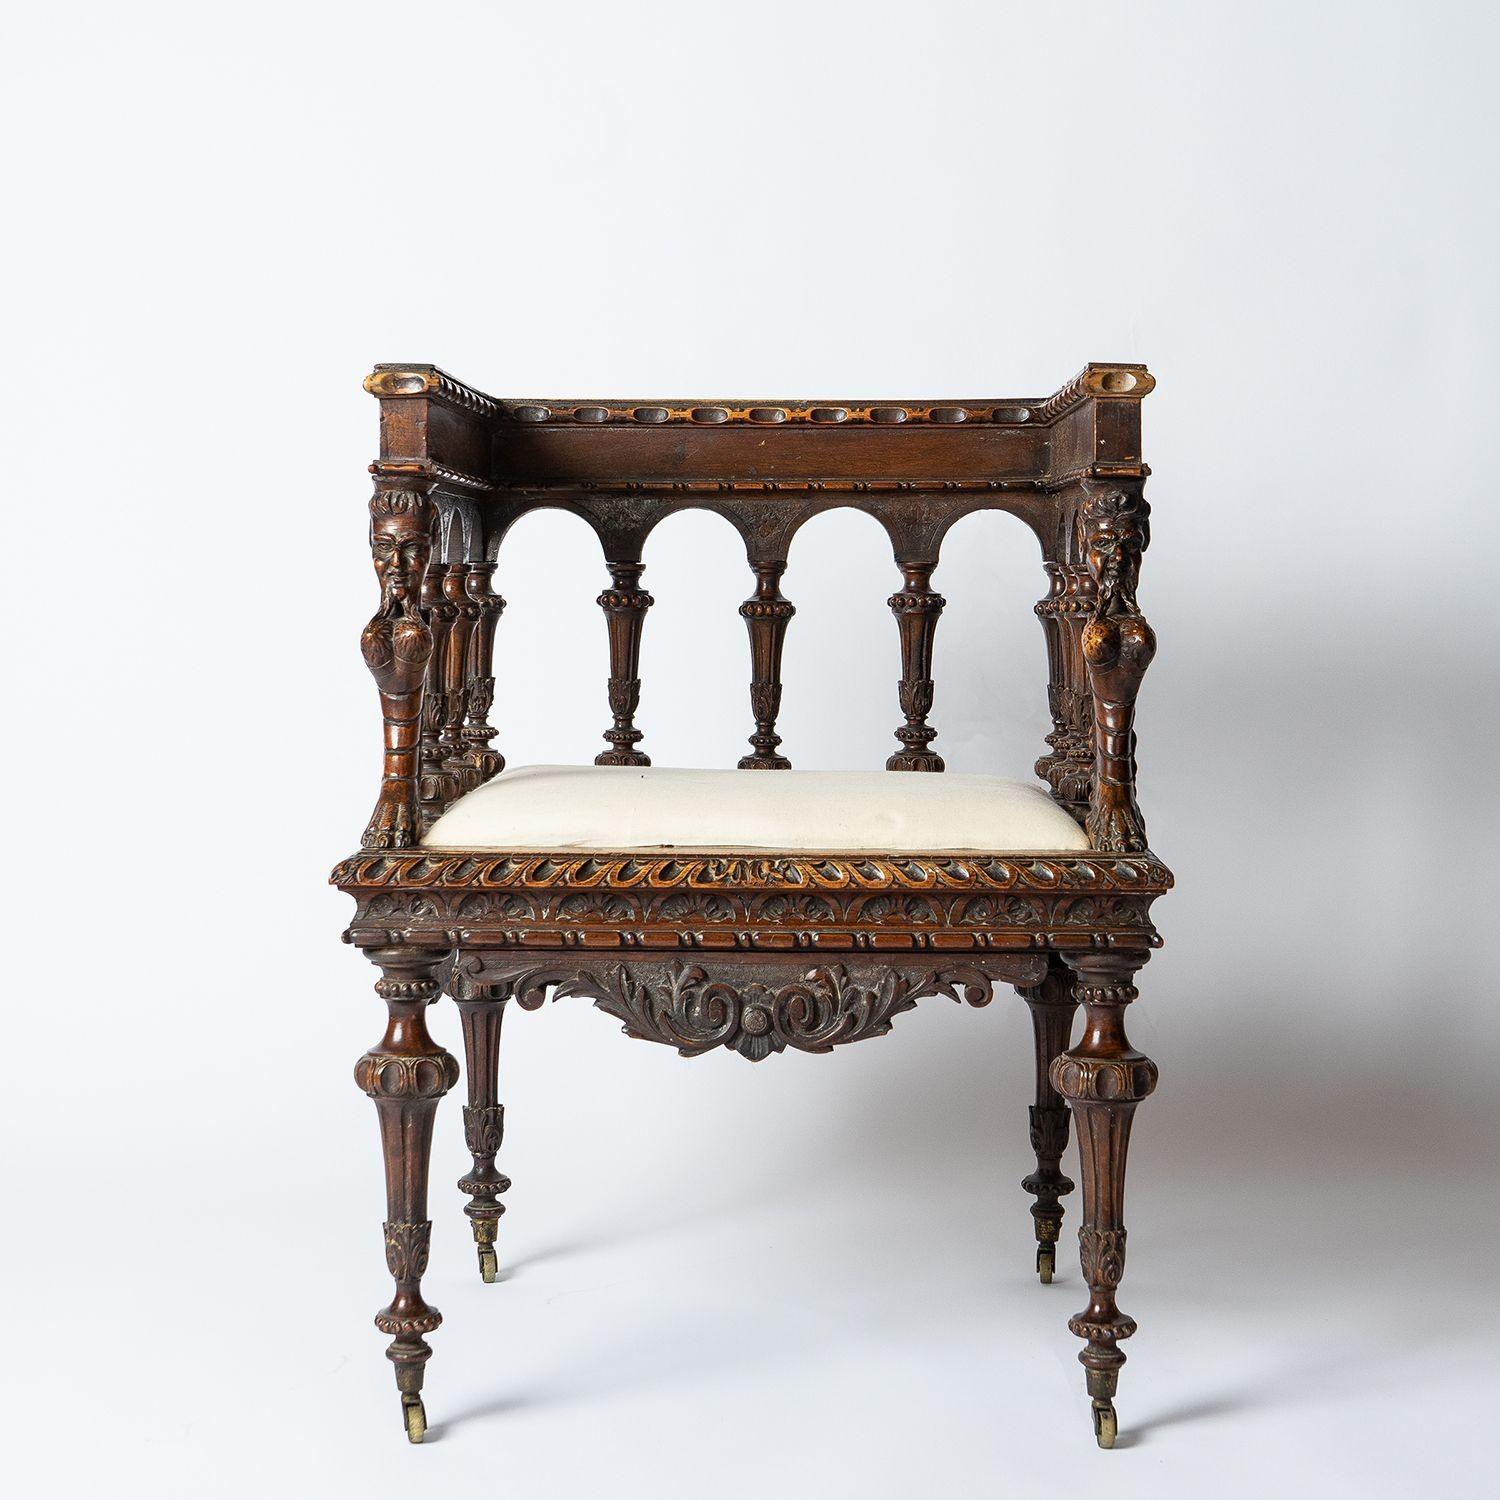 Antique walnut chair with figural carving
Probably Northern Italian in origin and carved in the Italian Renaissance style.
 
An unusually square shape profusely carved with naturalistic carvings and decorative turned spindles with grotesques or